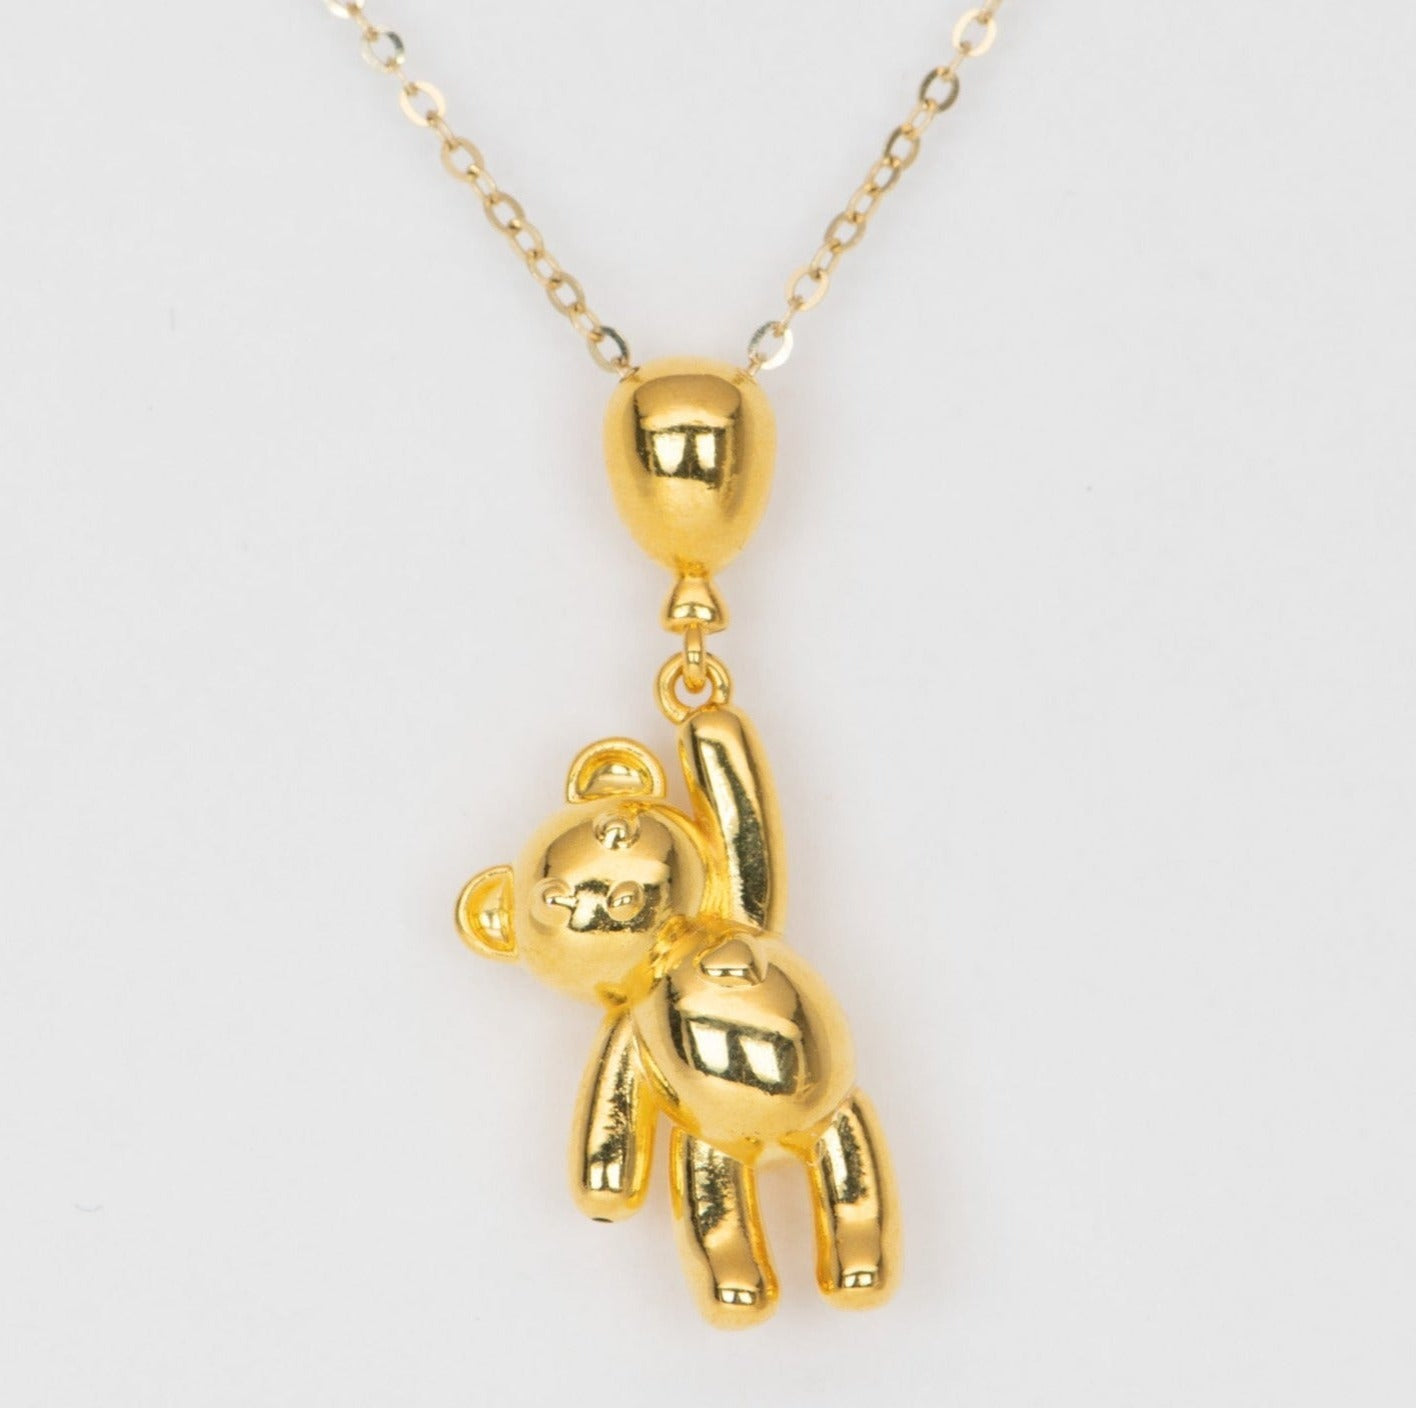 Buy Teddy Bear Pendant Necklace, Silver or Gold Stainless Steel, Woman  Jewel, Girl Jewel, Bear Necklace Online in India - Etsy